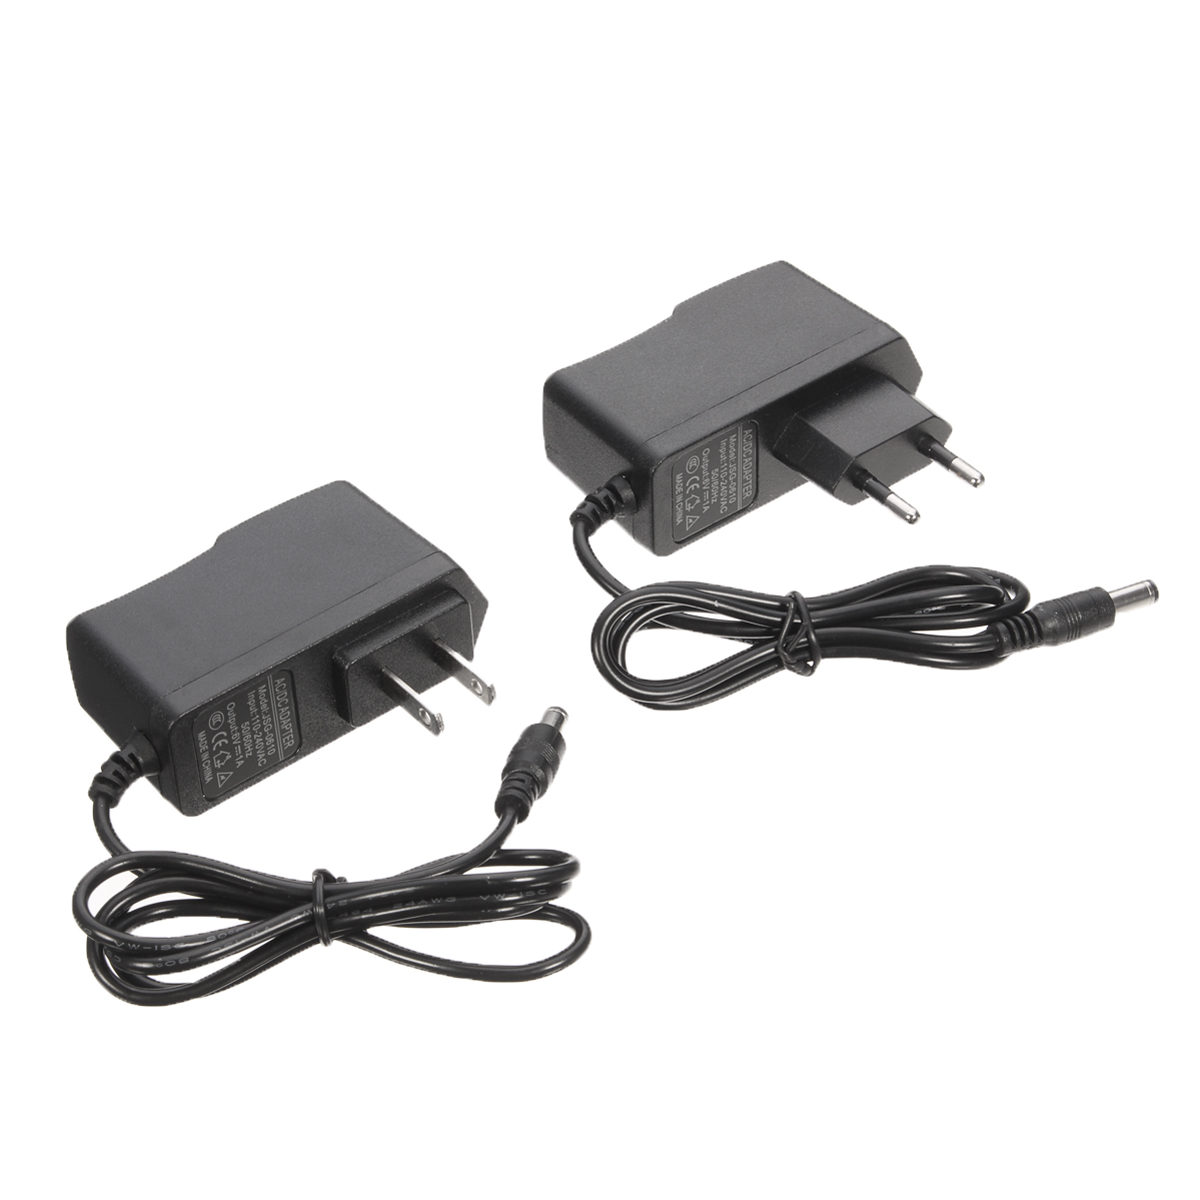 110-240V-USEU-Power-Supply-Charger-Adapter-Charger-For-Electric-Fruit-Potato-Vegetable-Skin-Peeler-1244288-5